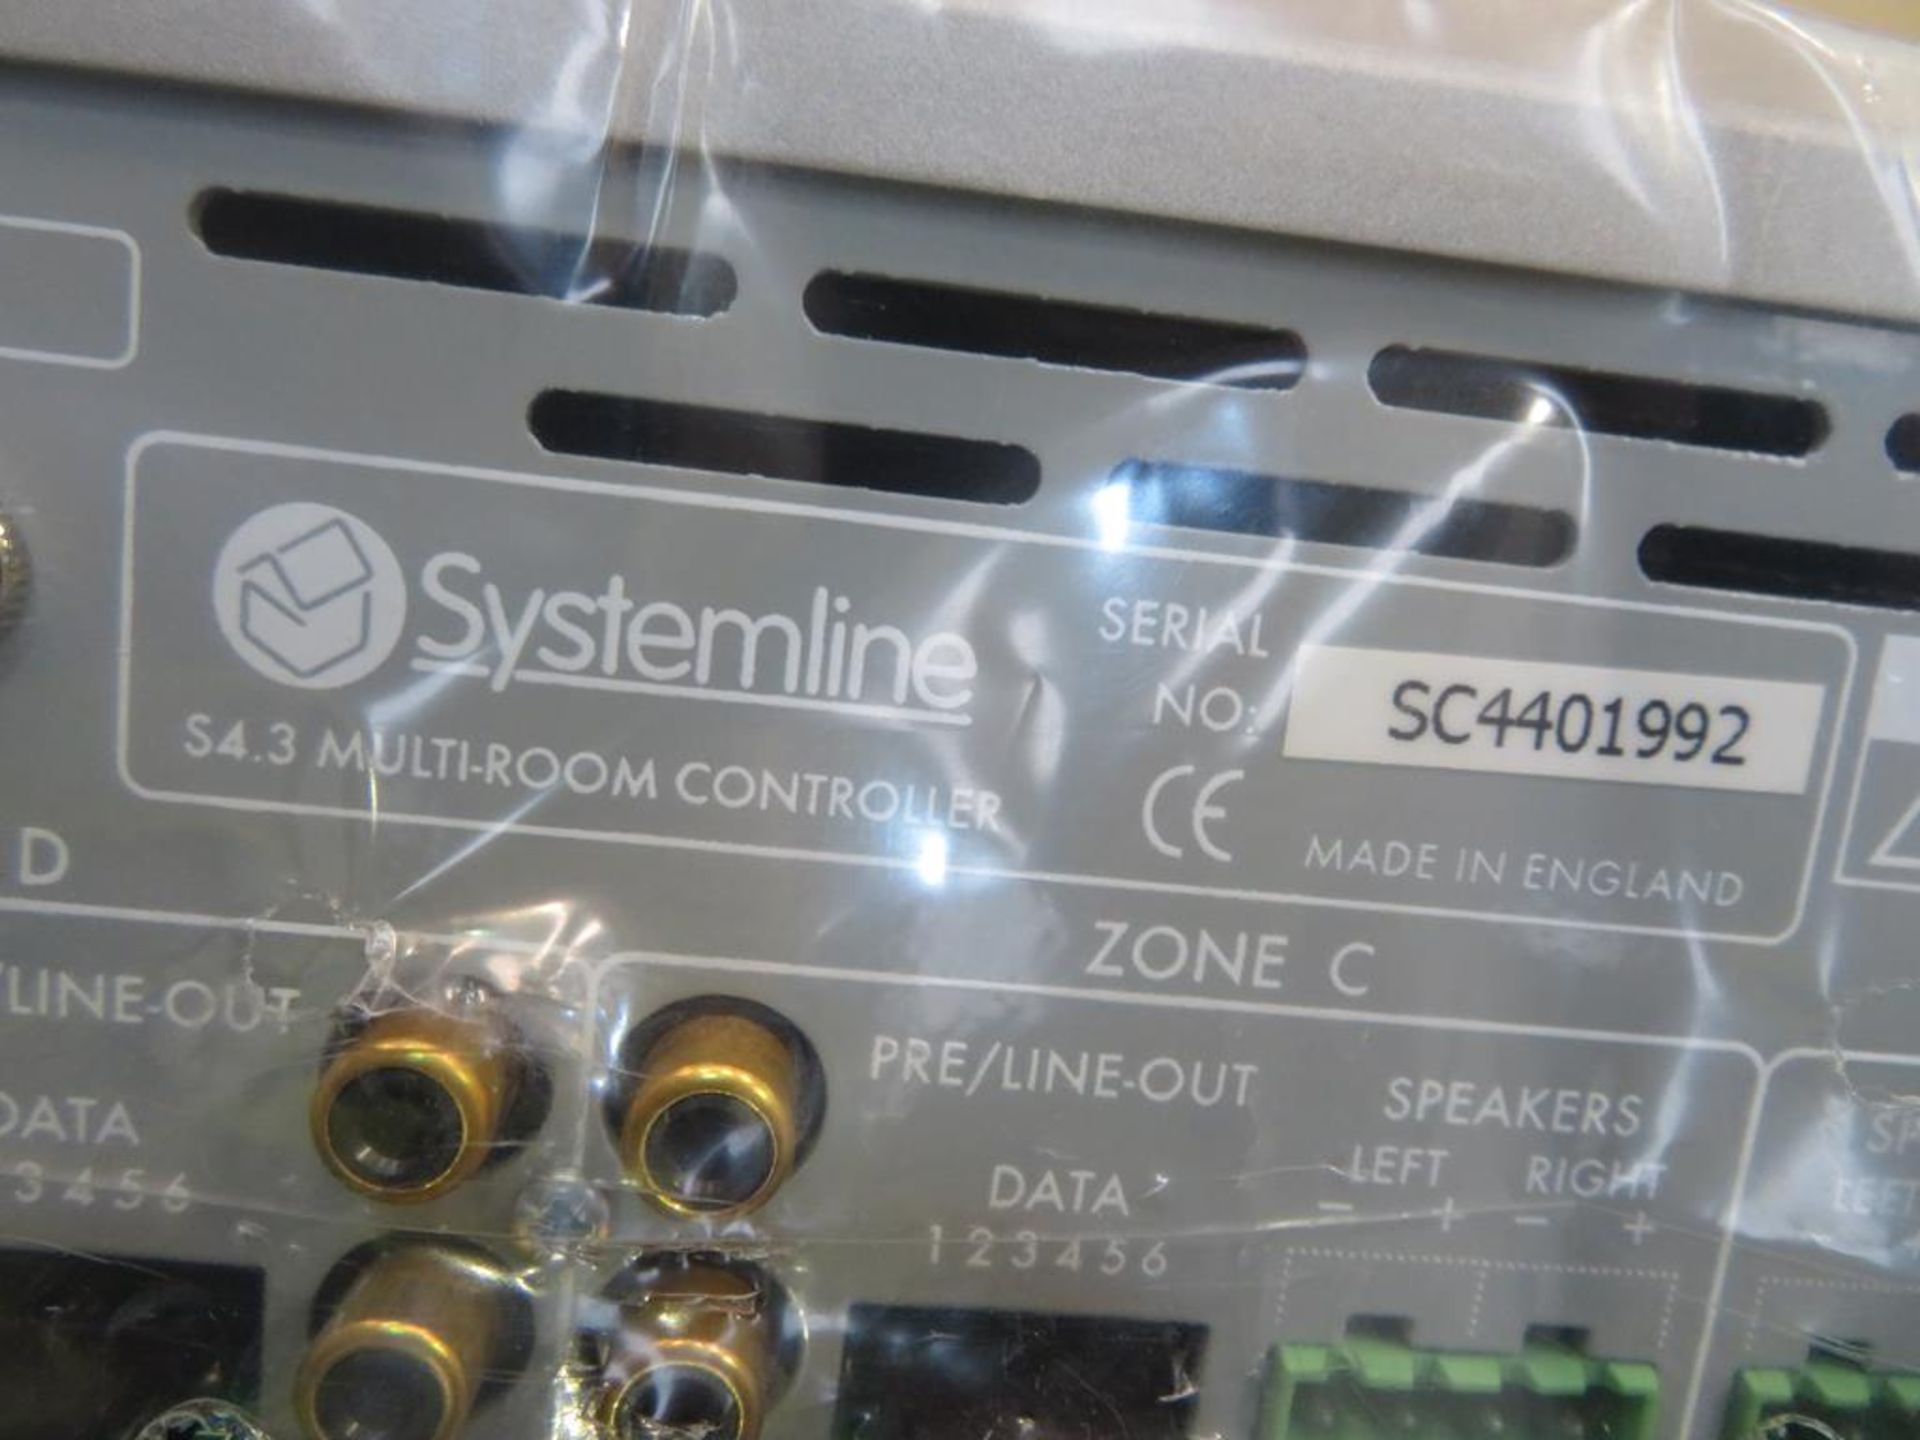 Systemline S4.4 Controller - Image 3 of 3